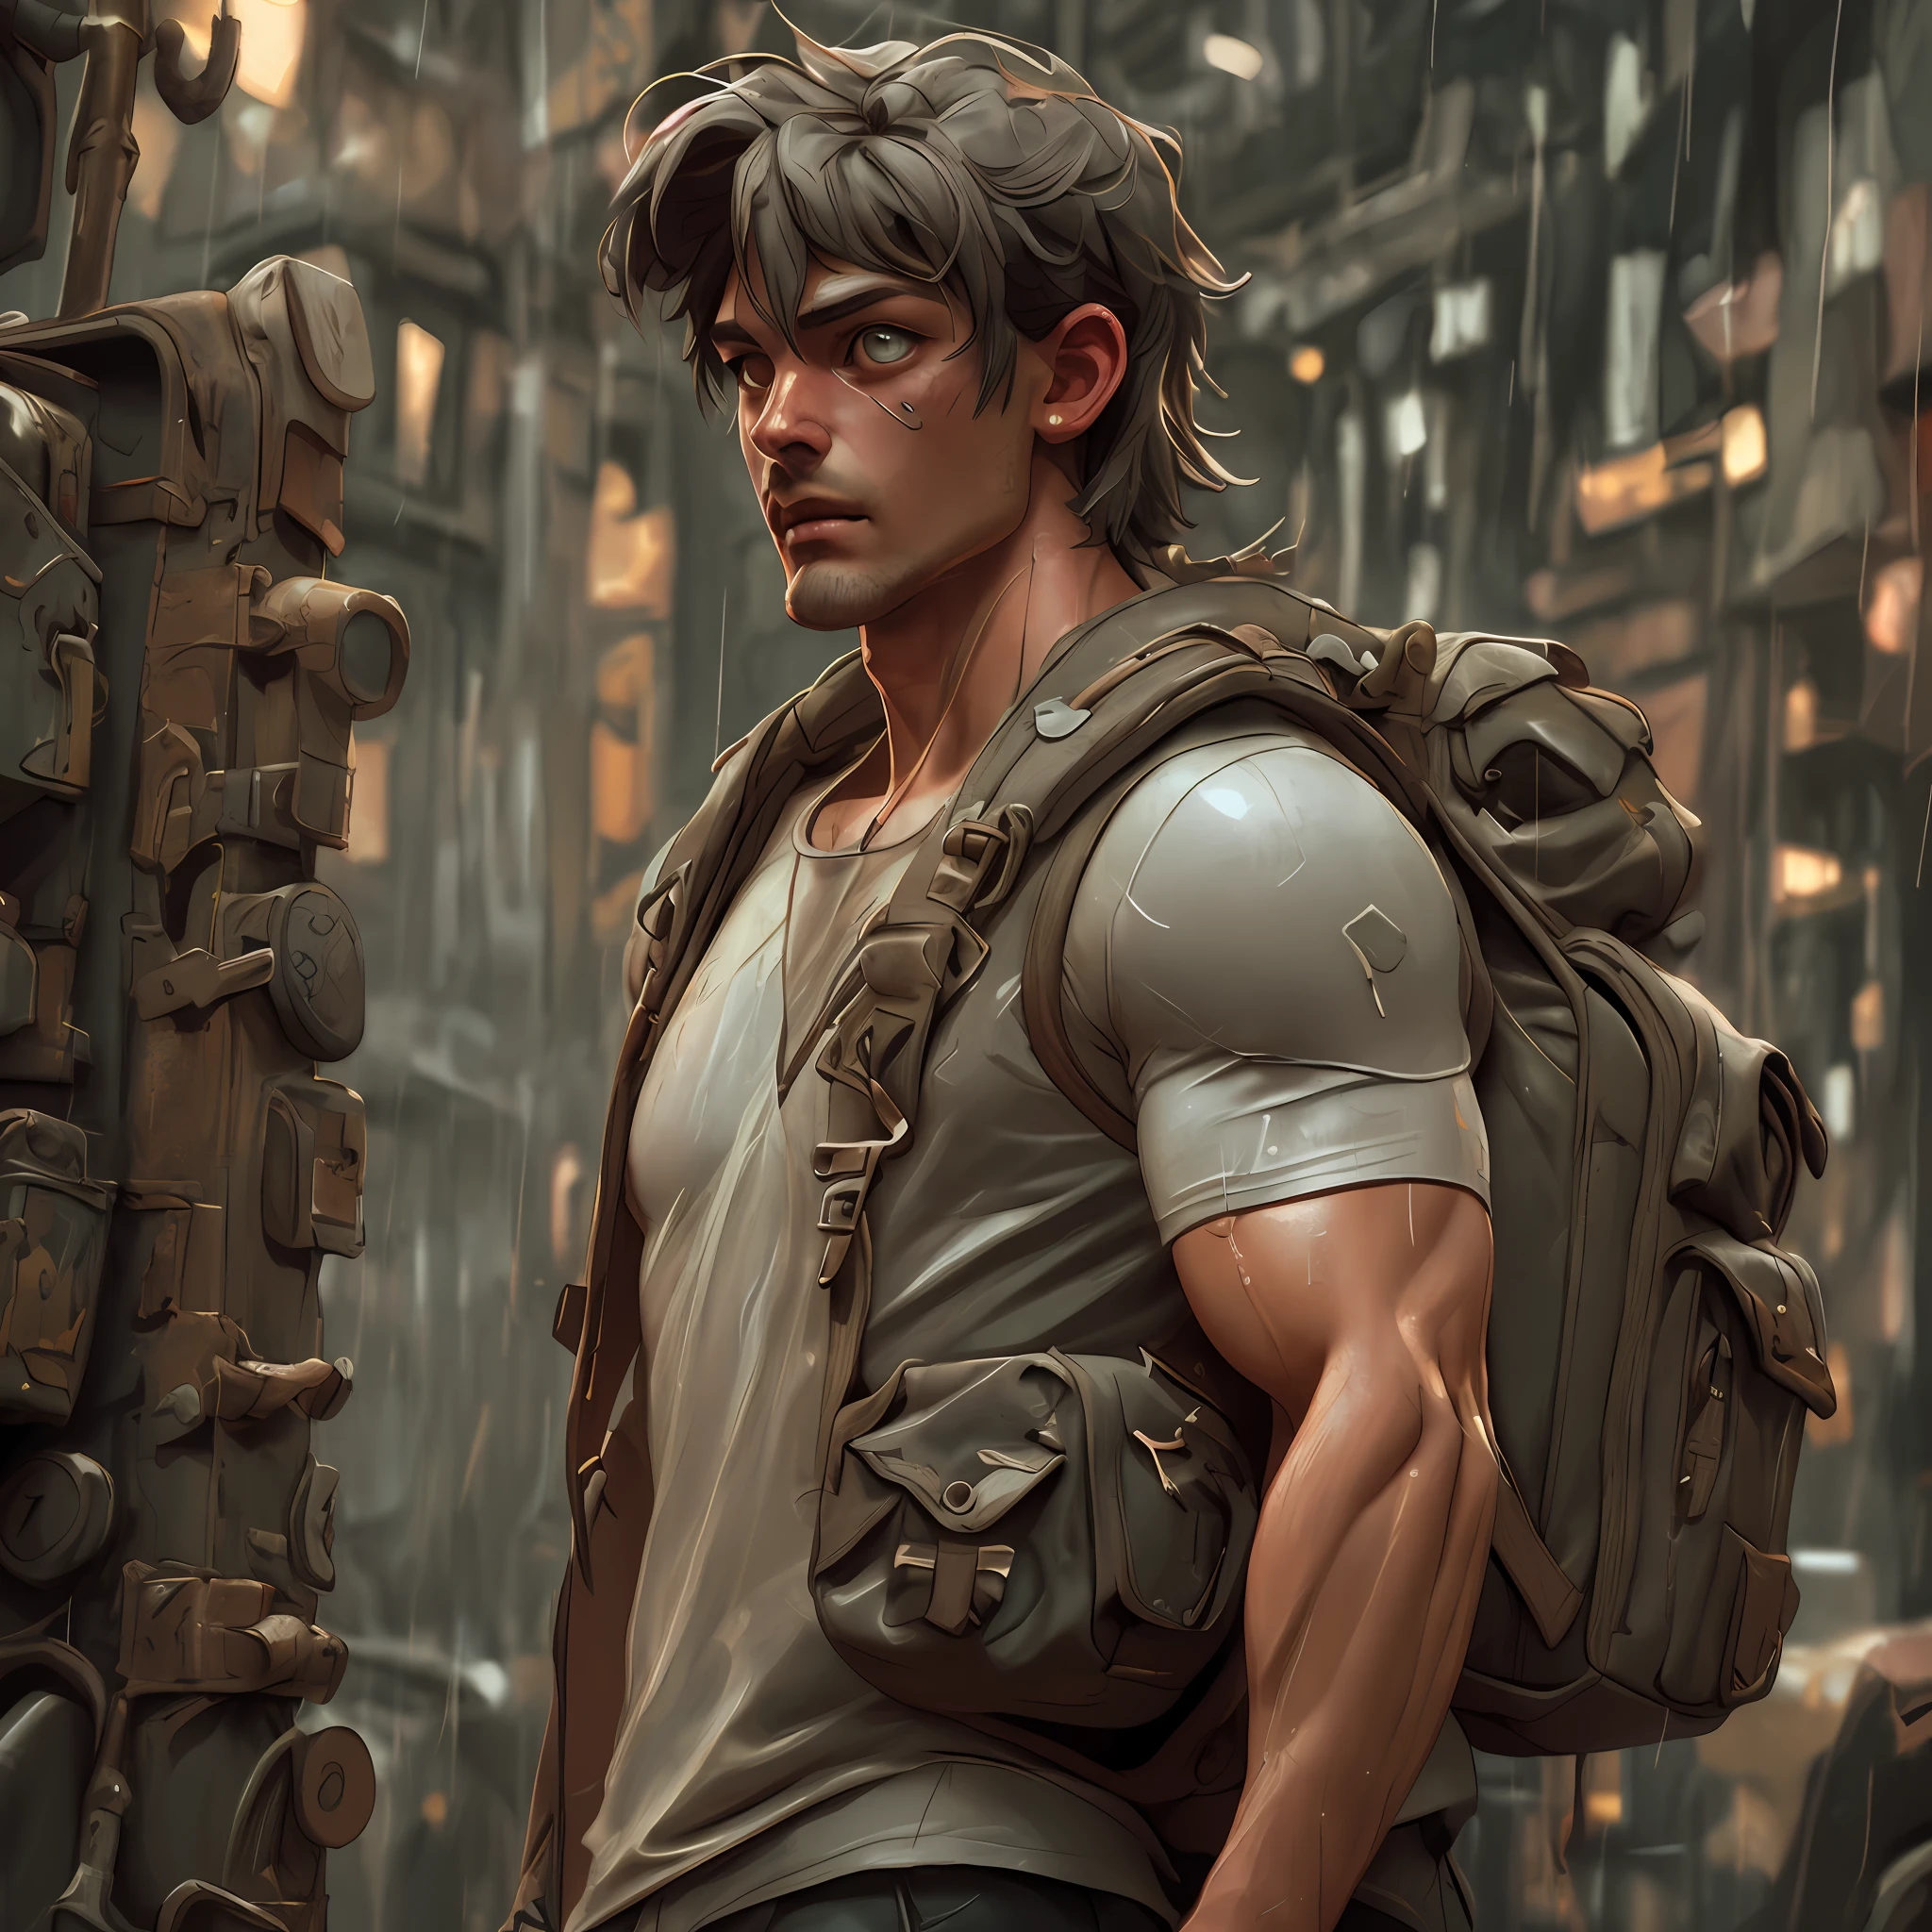 Fit man, backpack, epic realistic, photo, faded, complex stuff around, intricate background, soaking wet, ((((hdr)))), vibrant colors, intricate scene, artstation, intricate details, vignette